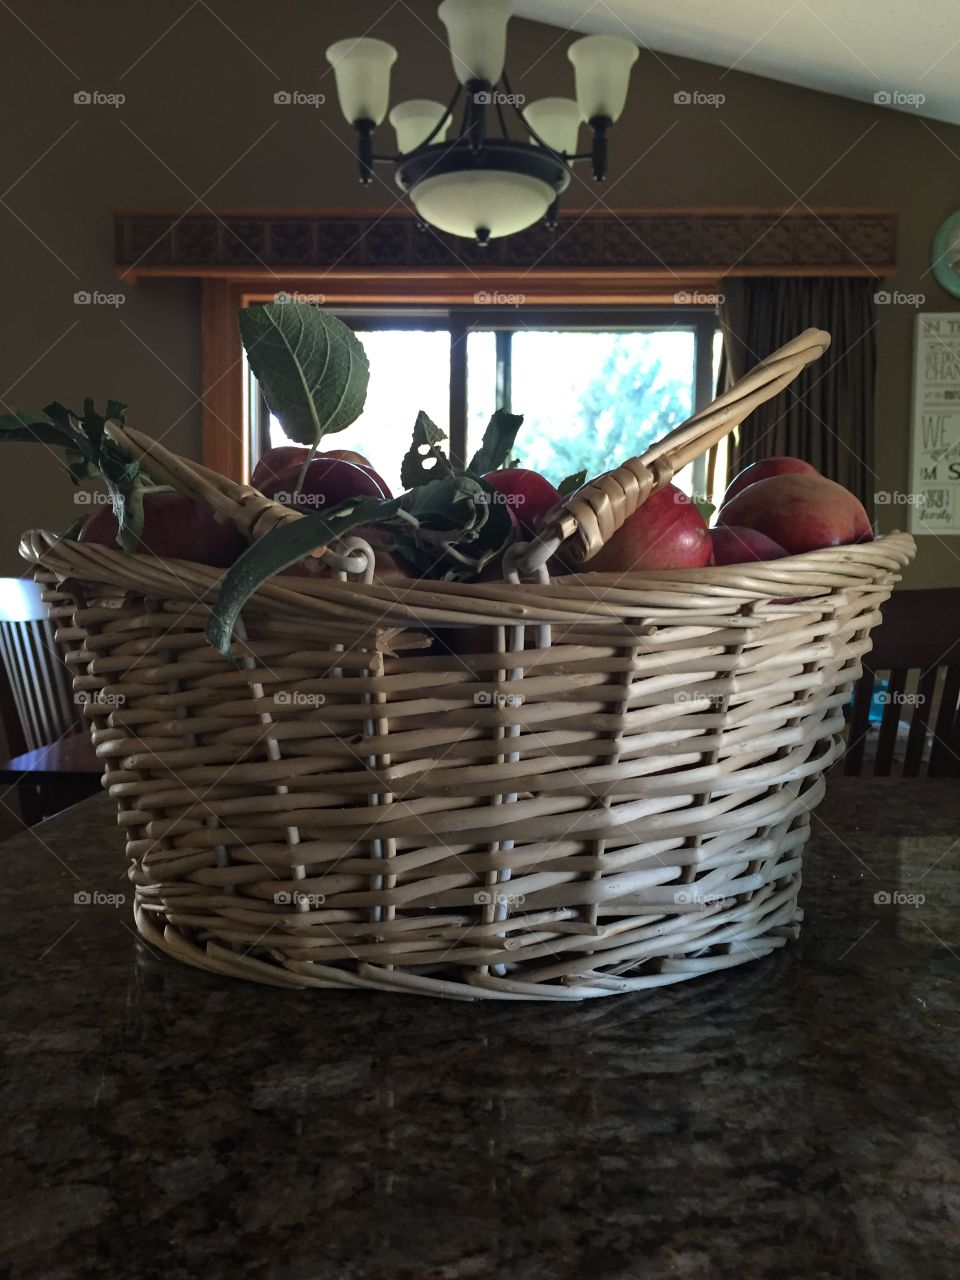 A Basket Full of Apple Goodnes. 
A basket of apples from my apple tree. 